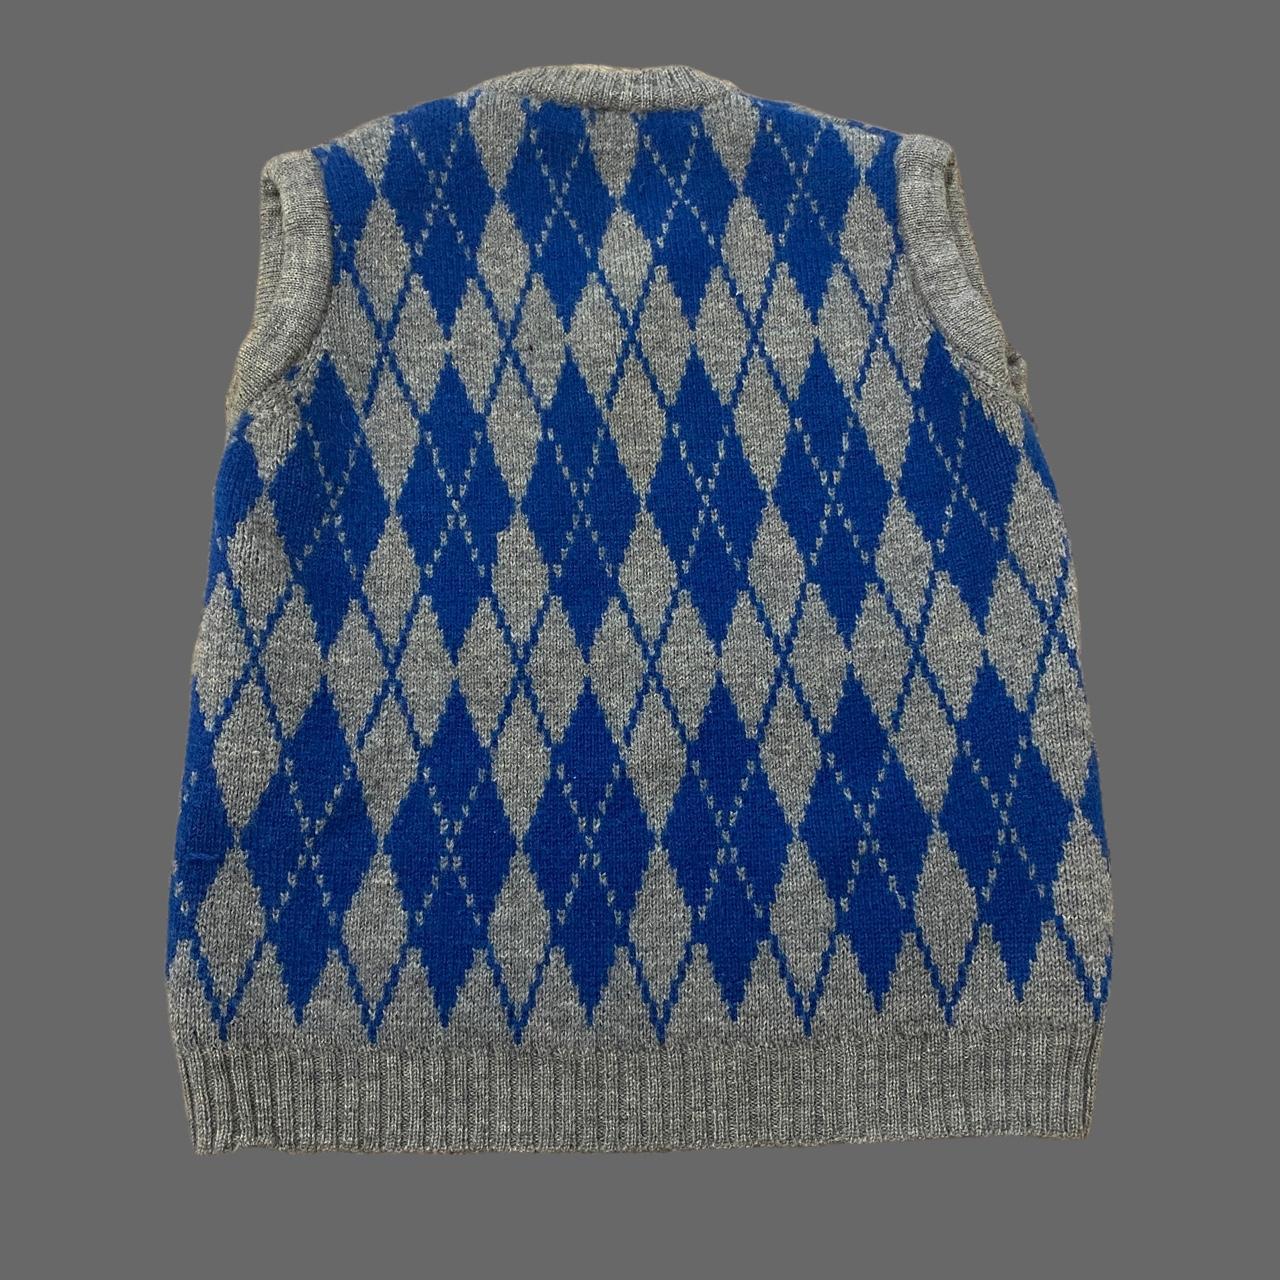 Product Image 2 - Vintage Argyle Sweater Vest.

-Made in